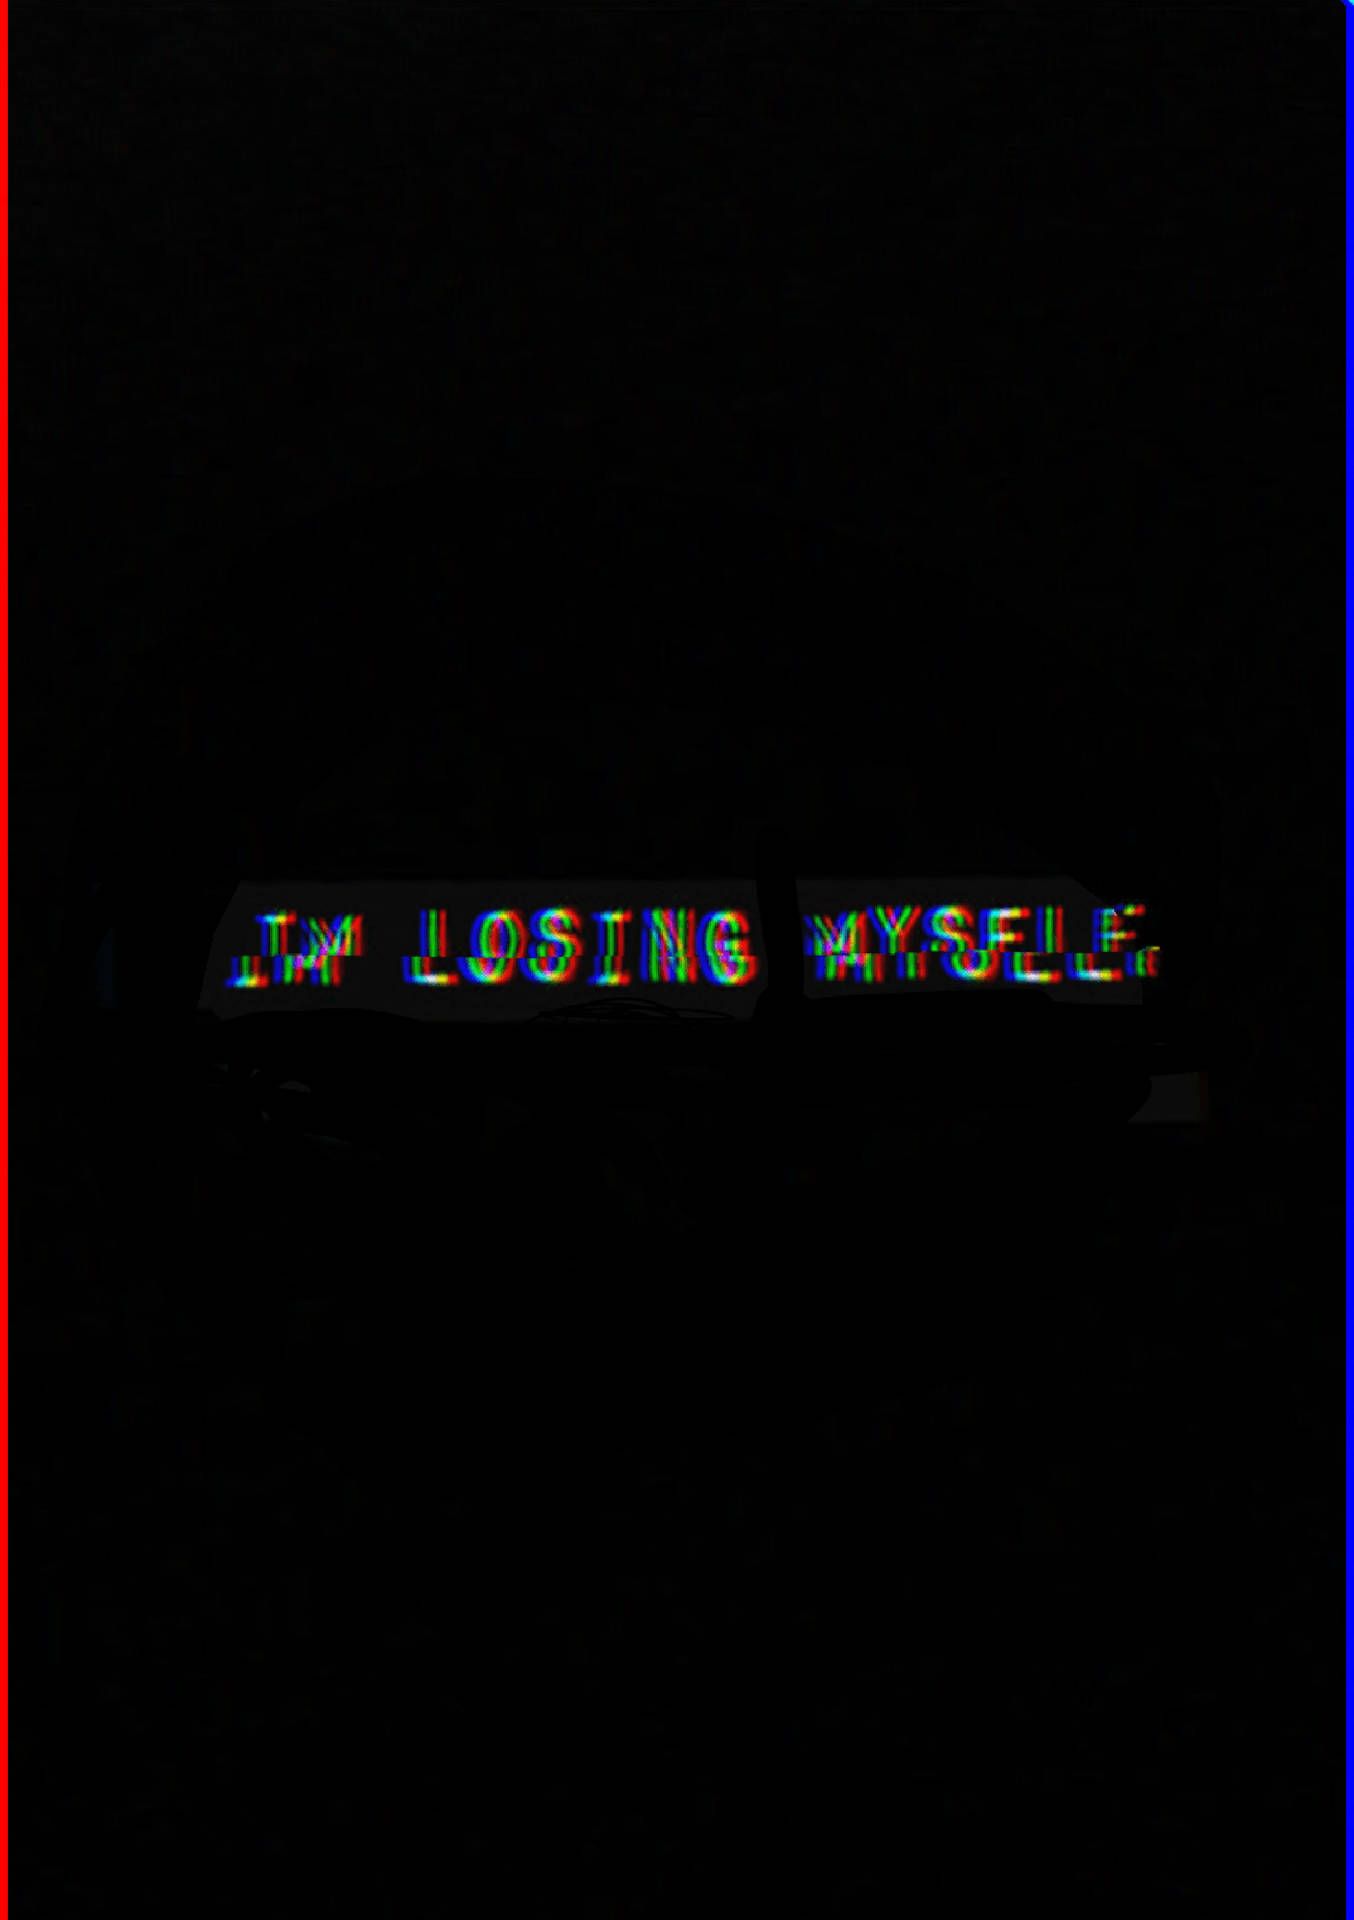 A black and white screen with the words my lost wires - Black glitch